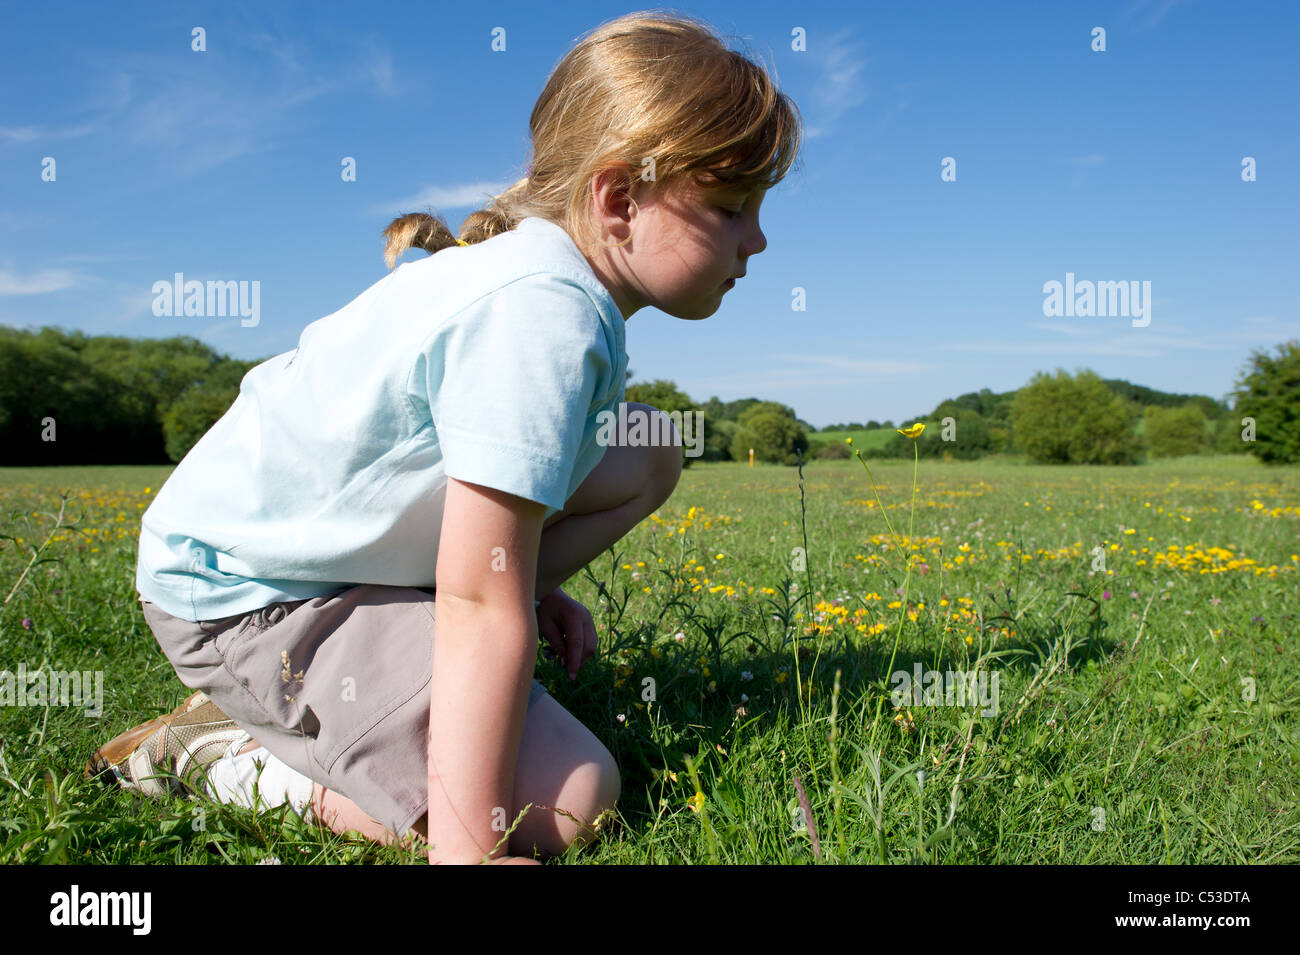 Young girl in tee shirt sitting in open field on summers day looking at yellow buttercups against a blue sky. Stock Photo